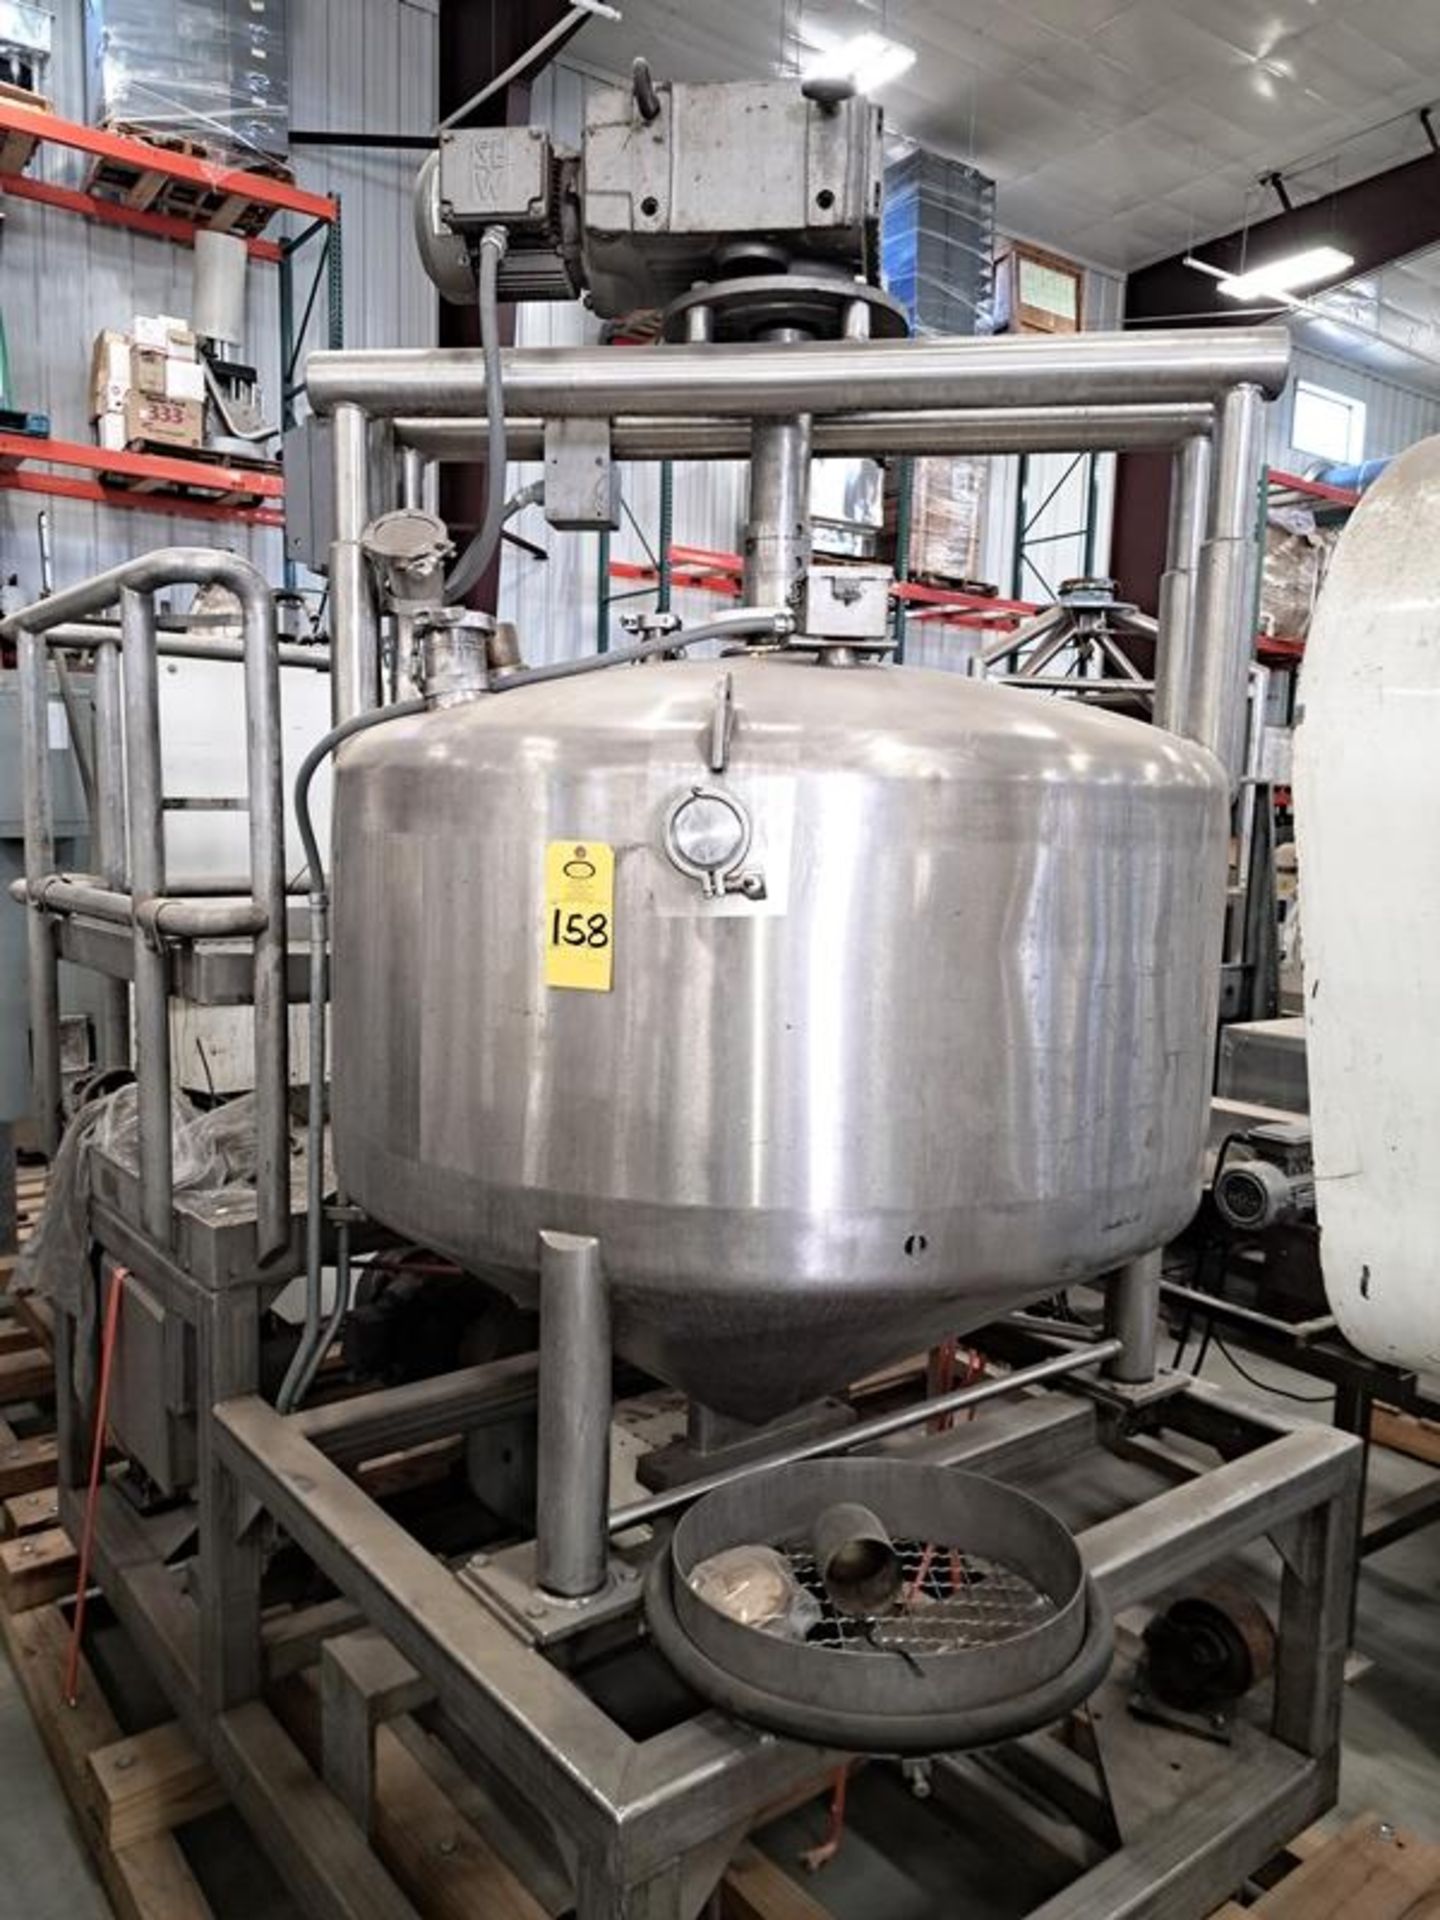 APV Crepaco Mdl. CCA Stainless Steel Wall Tank, 52" diameter X 46" deep with top mounted mixer on